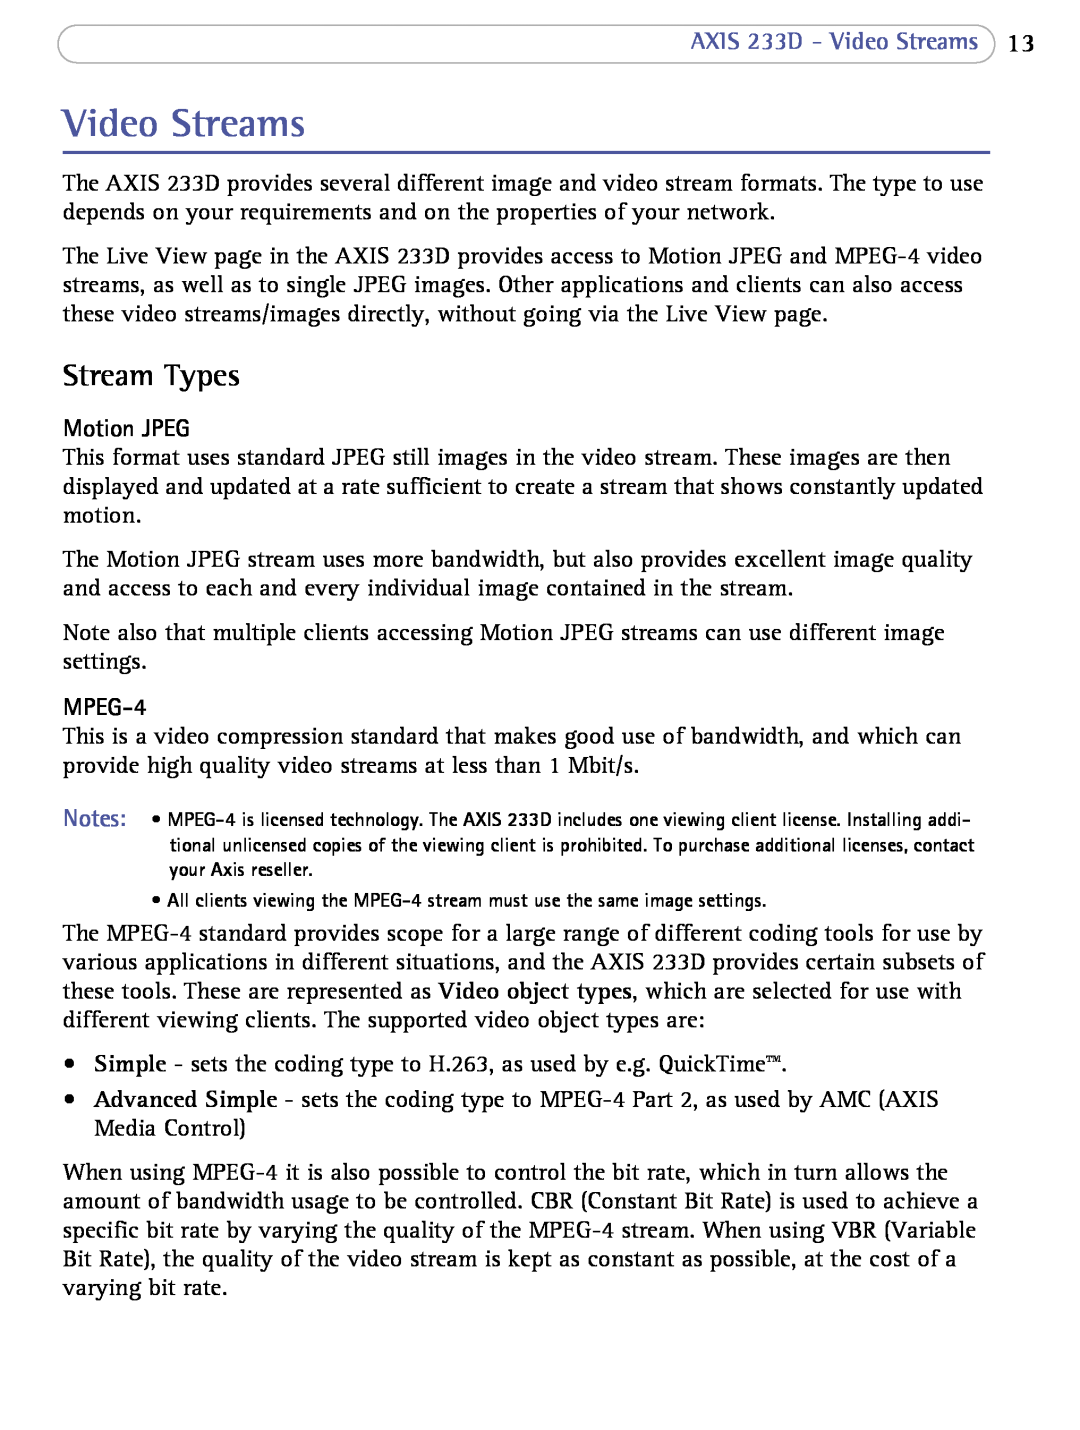 Axis Communications user manual Stream Types, AXIS 233D - Video Streams, Motion JPEG, MPEG-4 